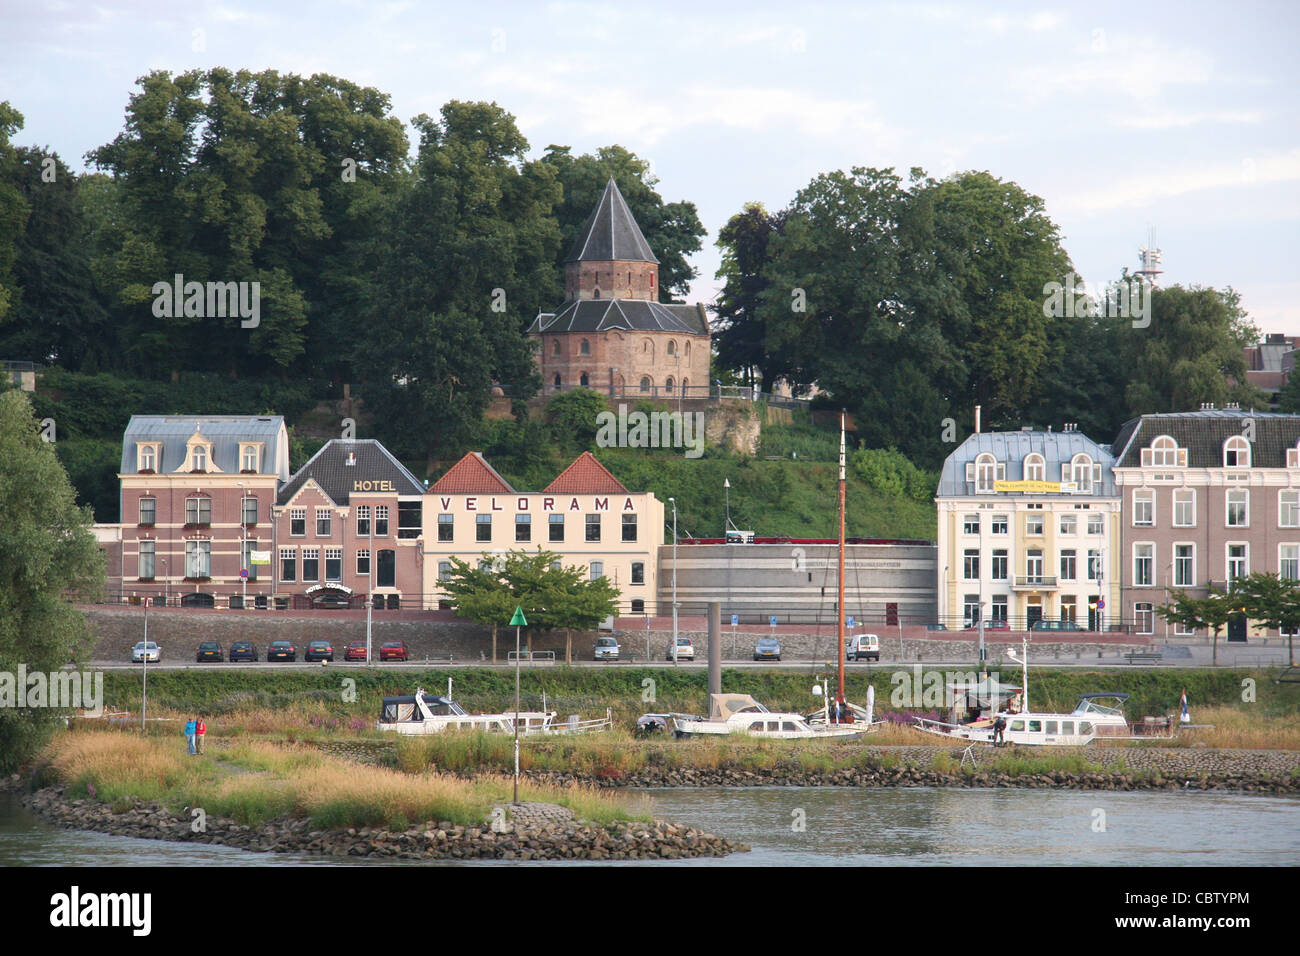 Nijmegen from under the Waalbrug on the Rhine River, Germany Stock Photo